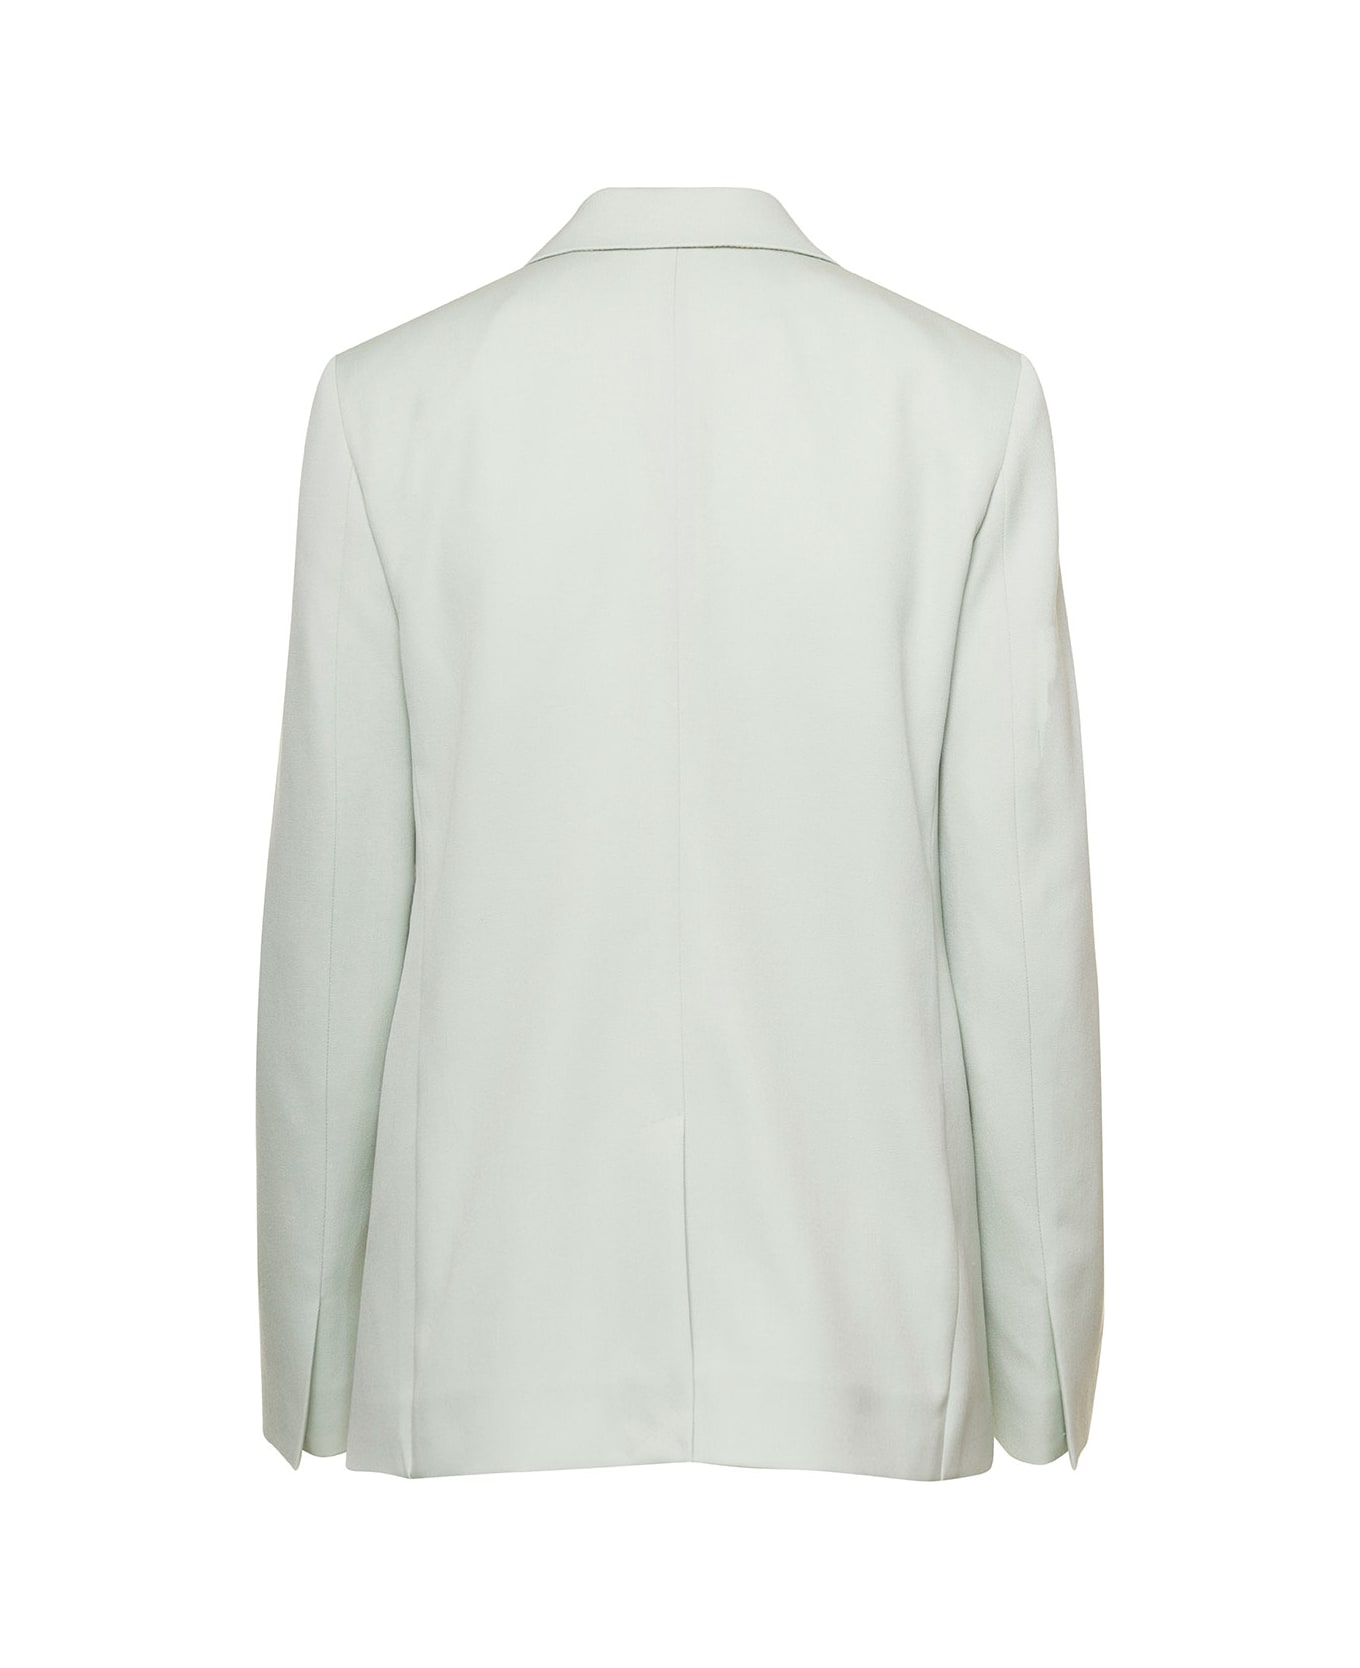 Lanvin Light Green Mono-breasted Blazer With Pockets In Wool Woman - Green